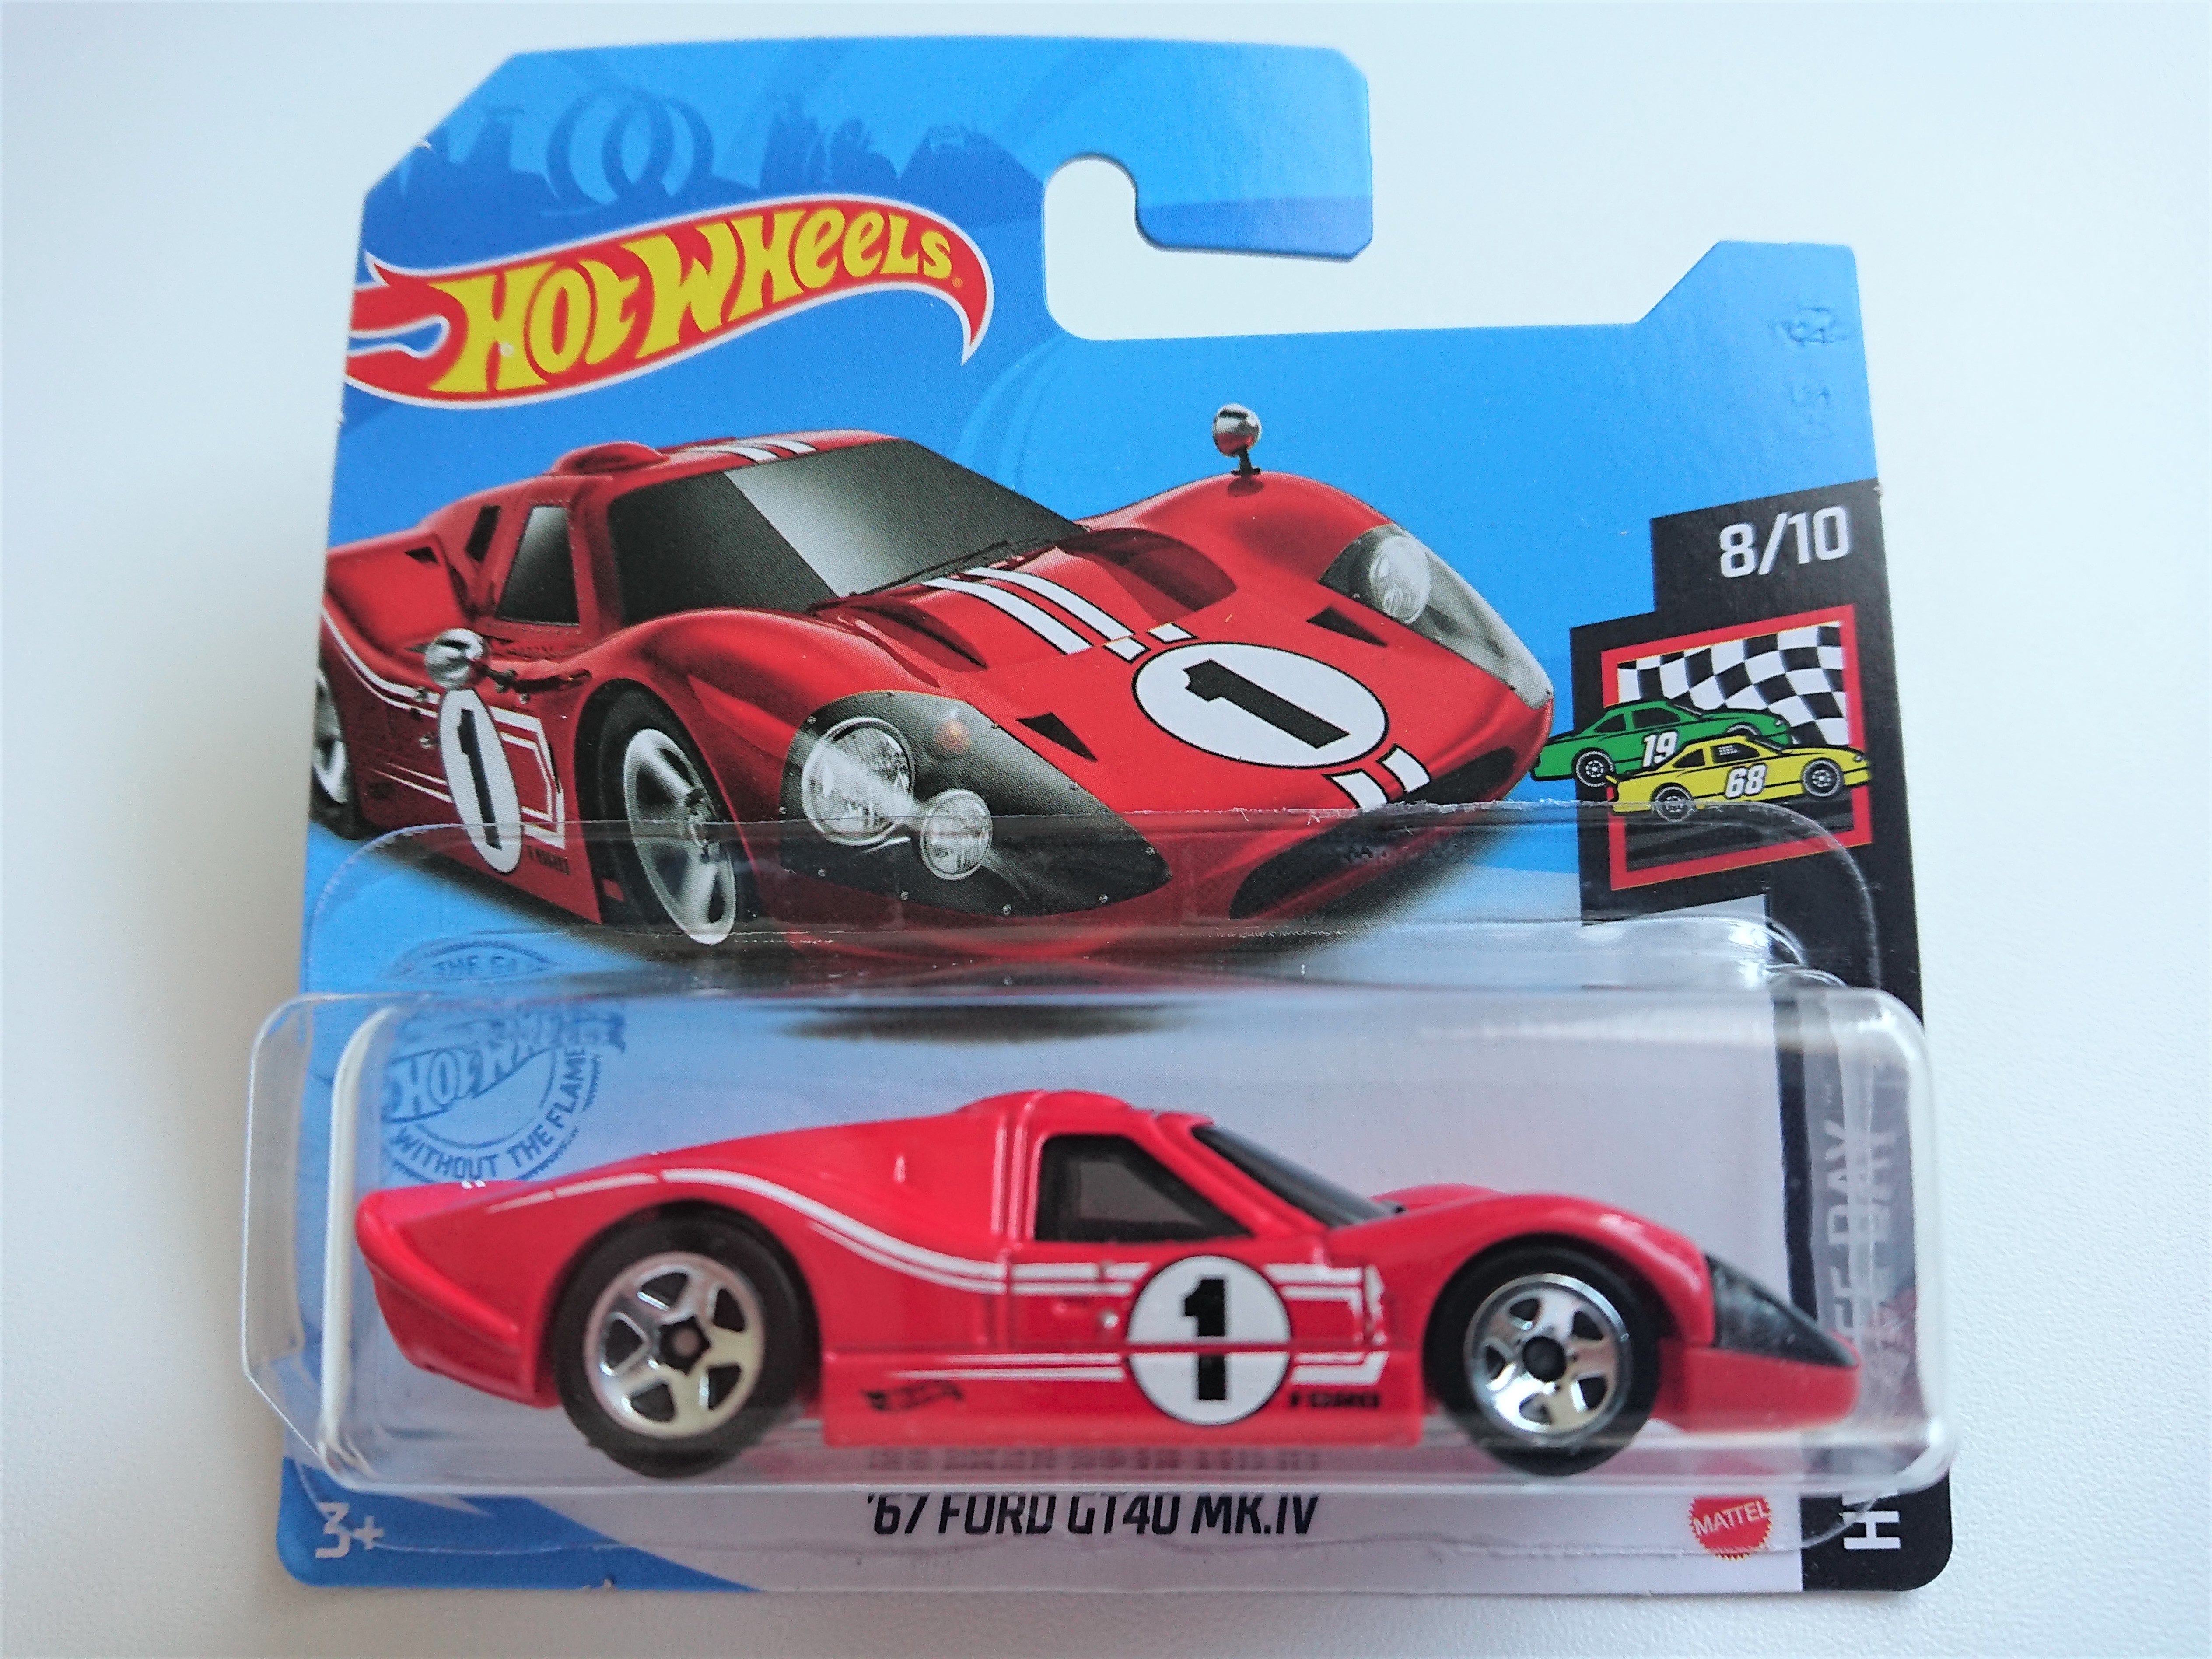 2021 Hot Wheels '67 Ford GT40 MK.IV Le Mans Race Red w/ Real Riders SUPER CUSTOM 